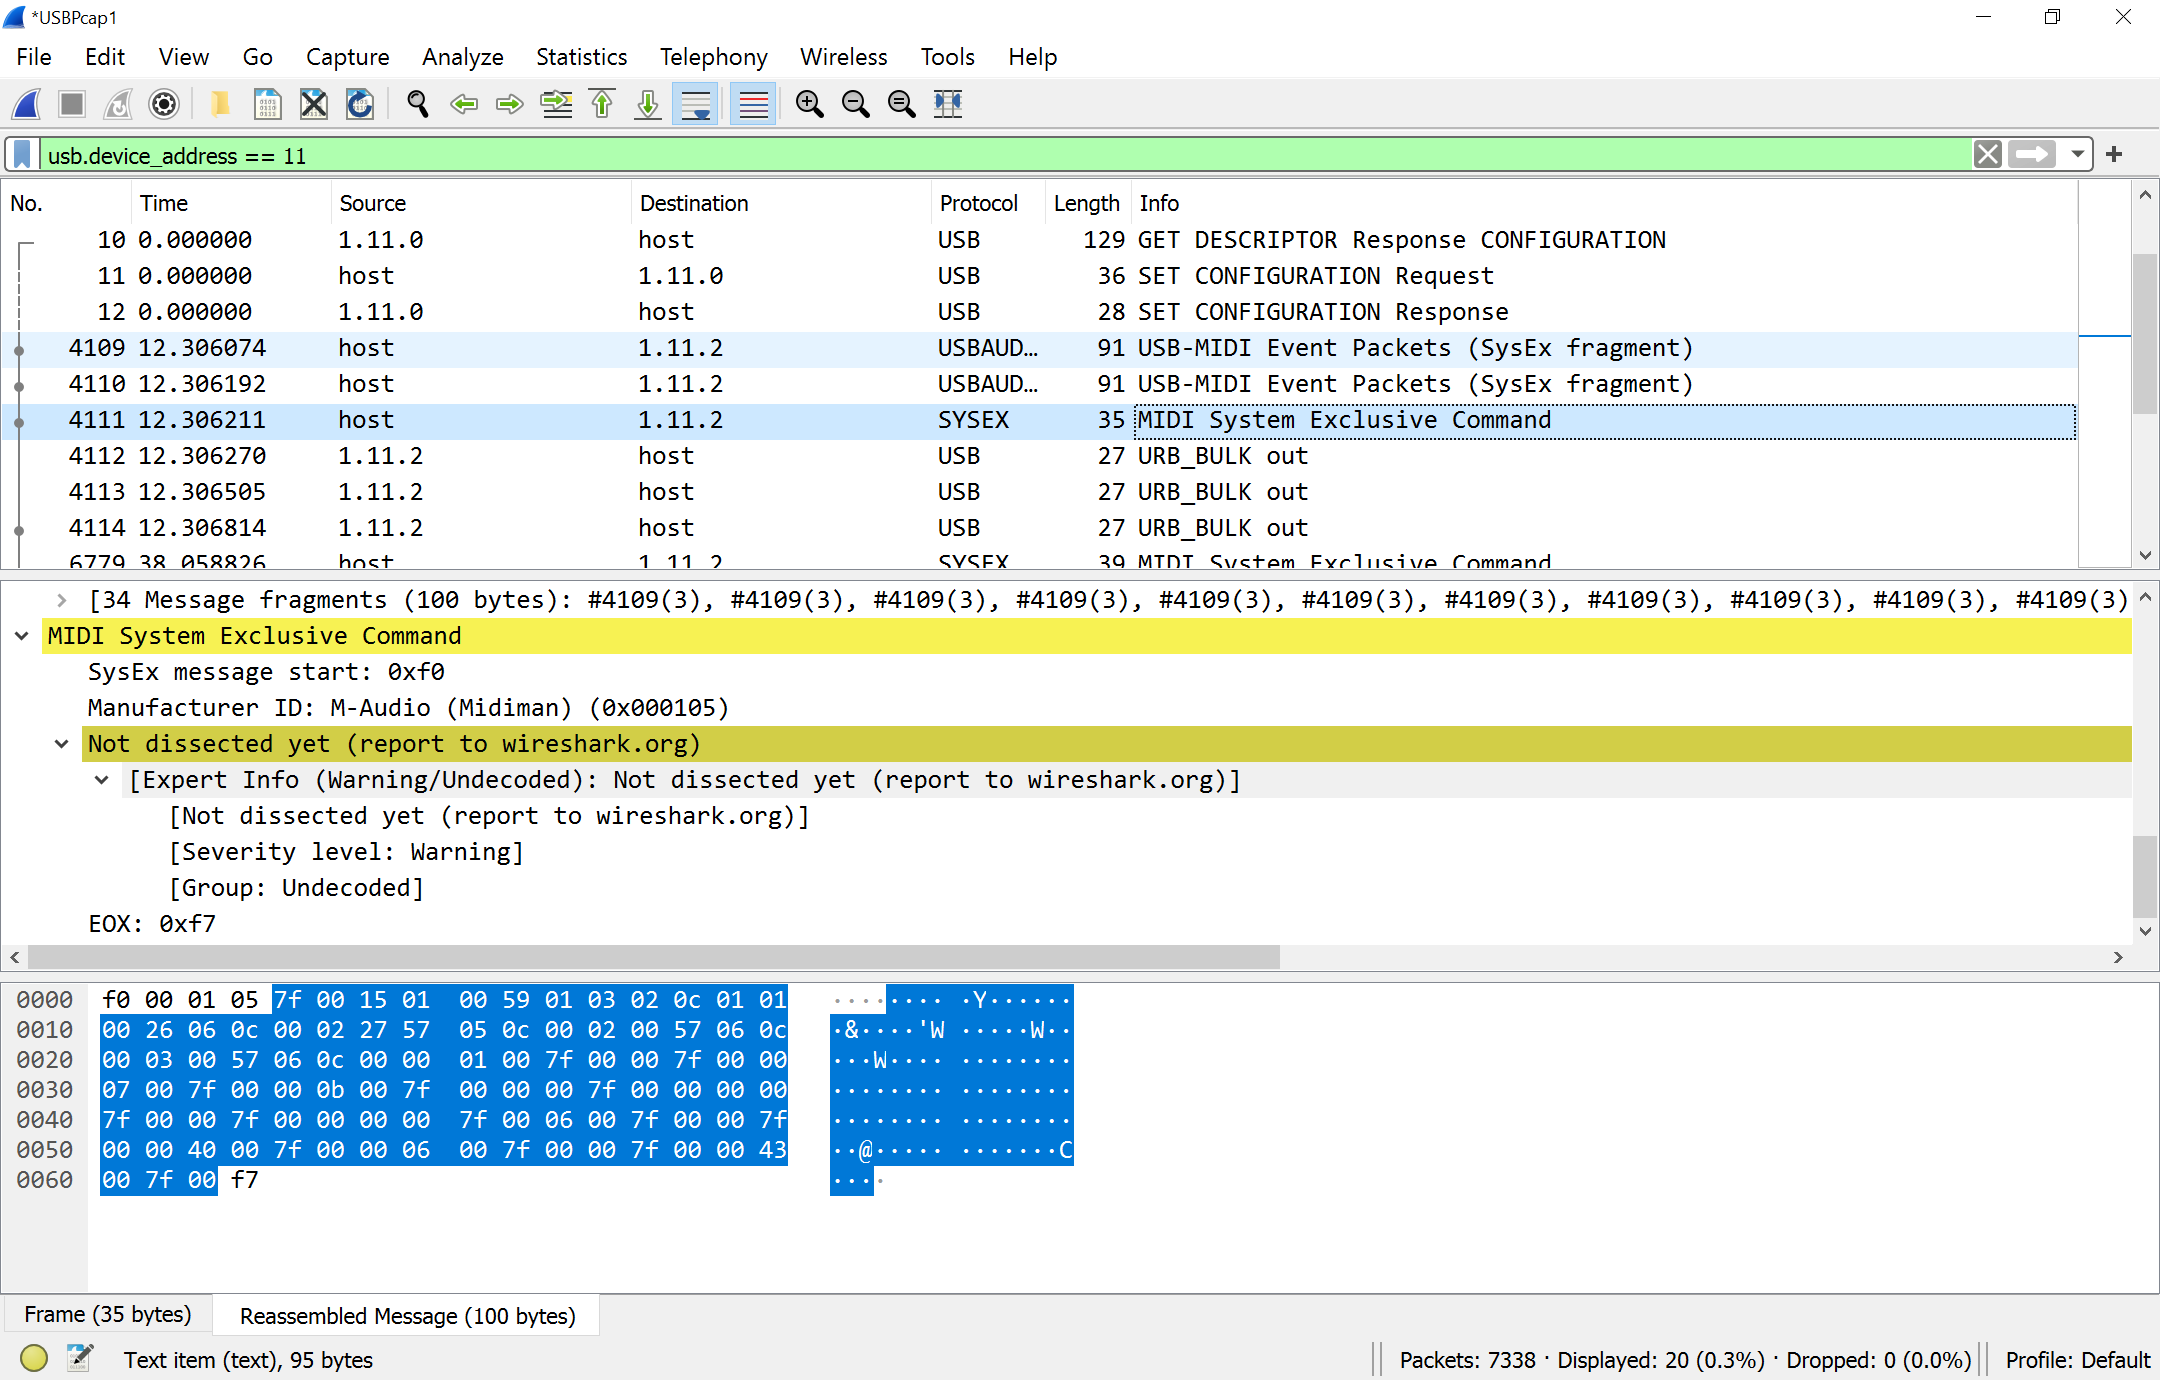 wireshark window, with a bunch of hex data